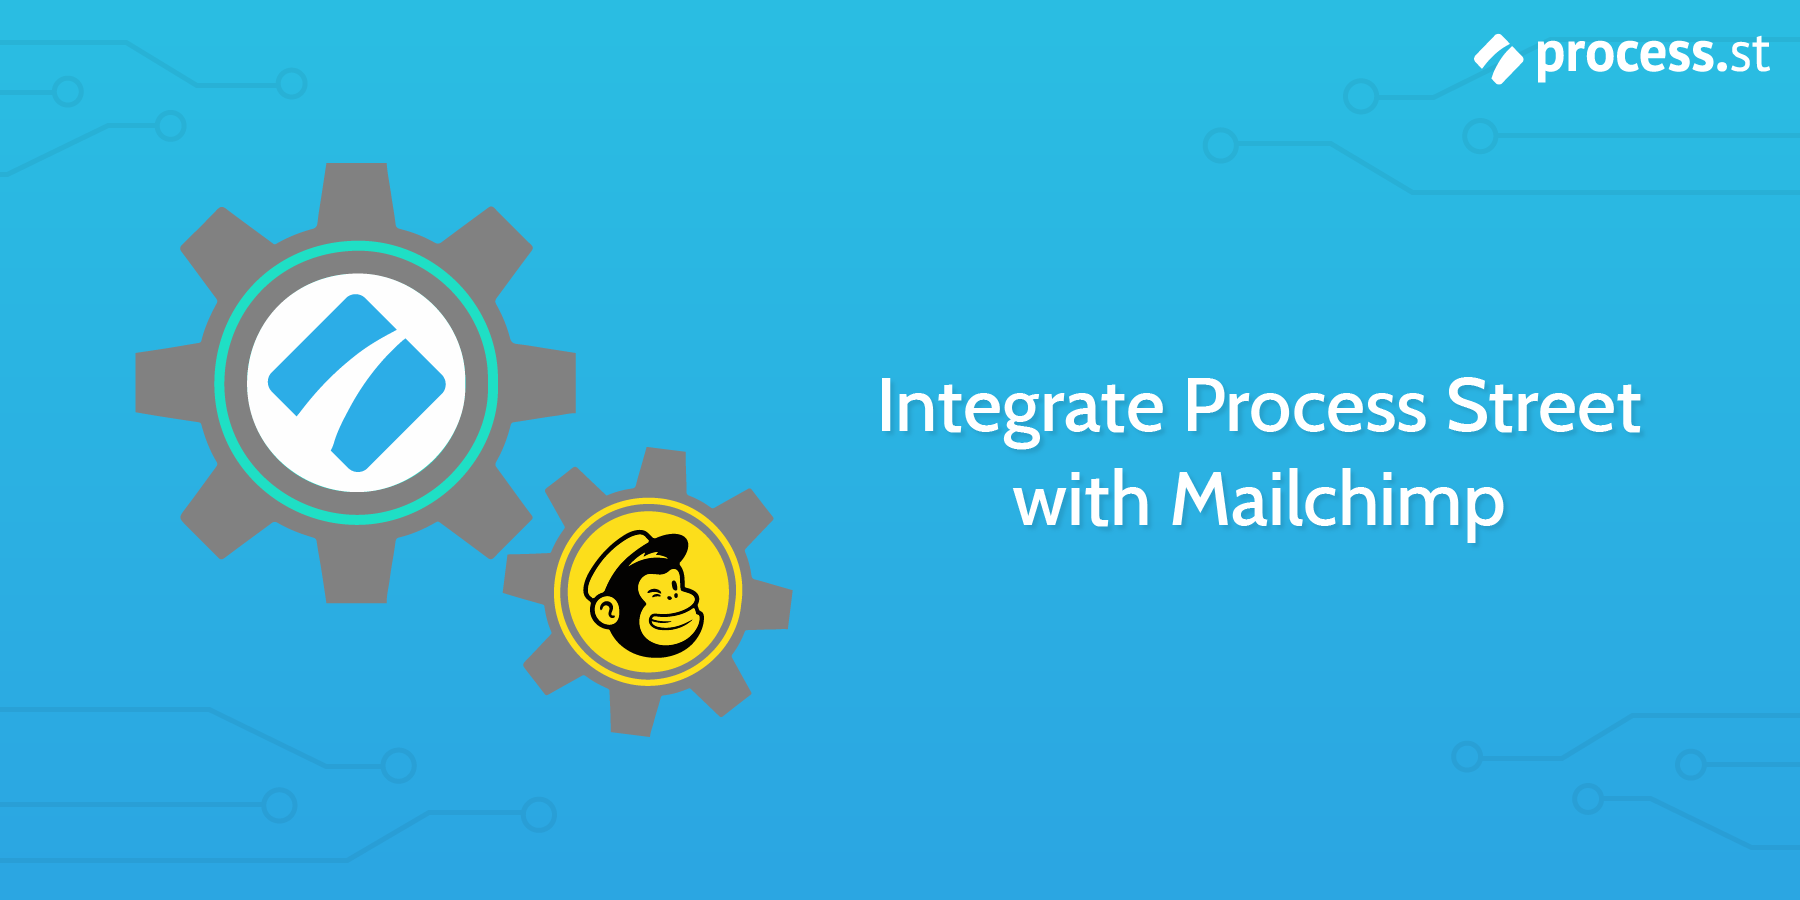 Integrate Process Street with Mailchimp